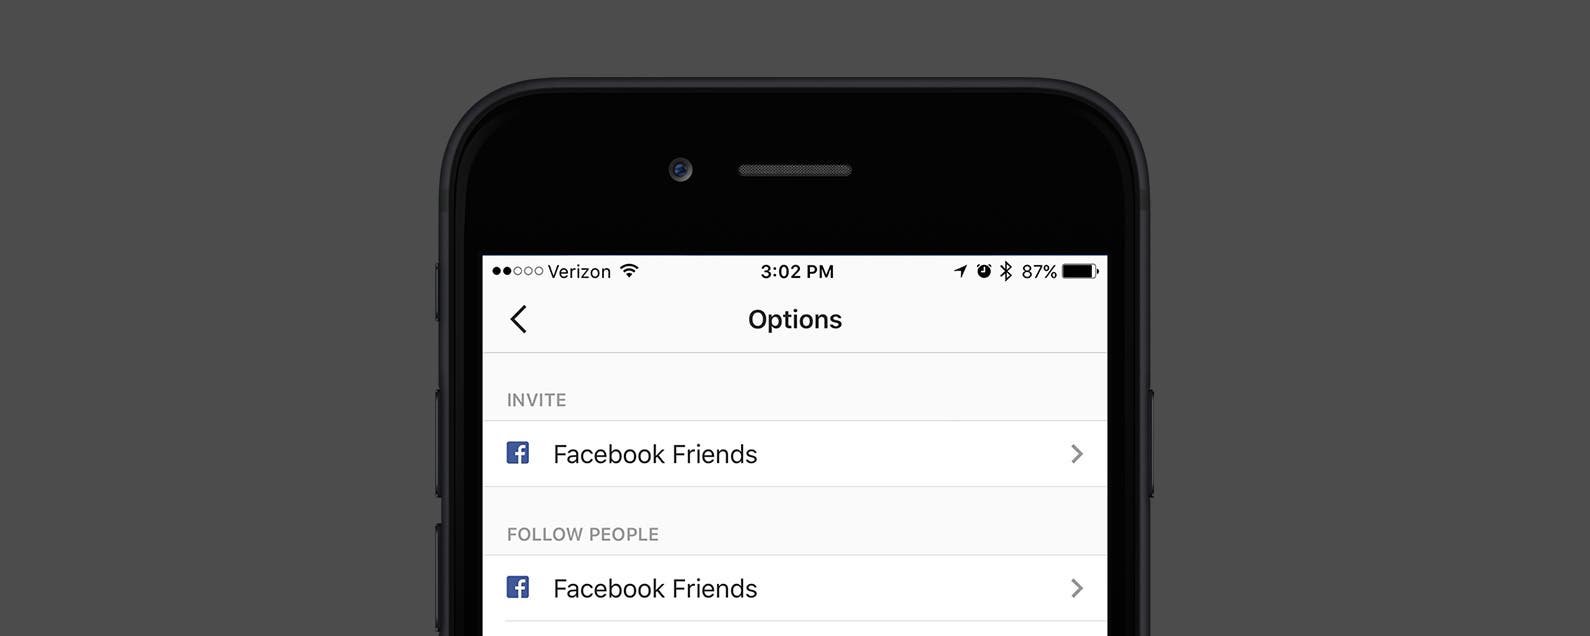 how to invite your facebook friend to join instagram - follow your facebook friends on instagram